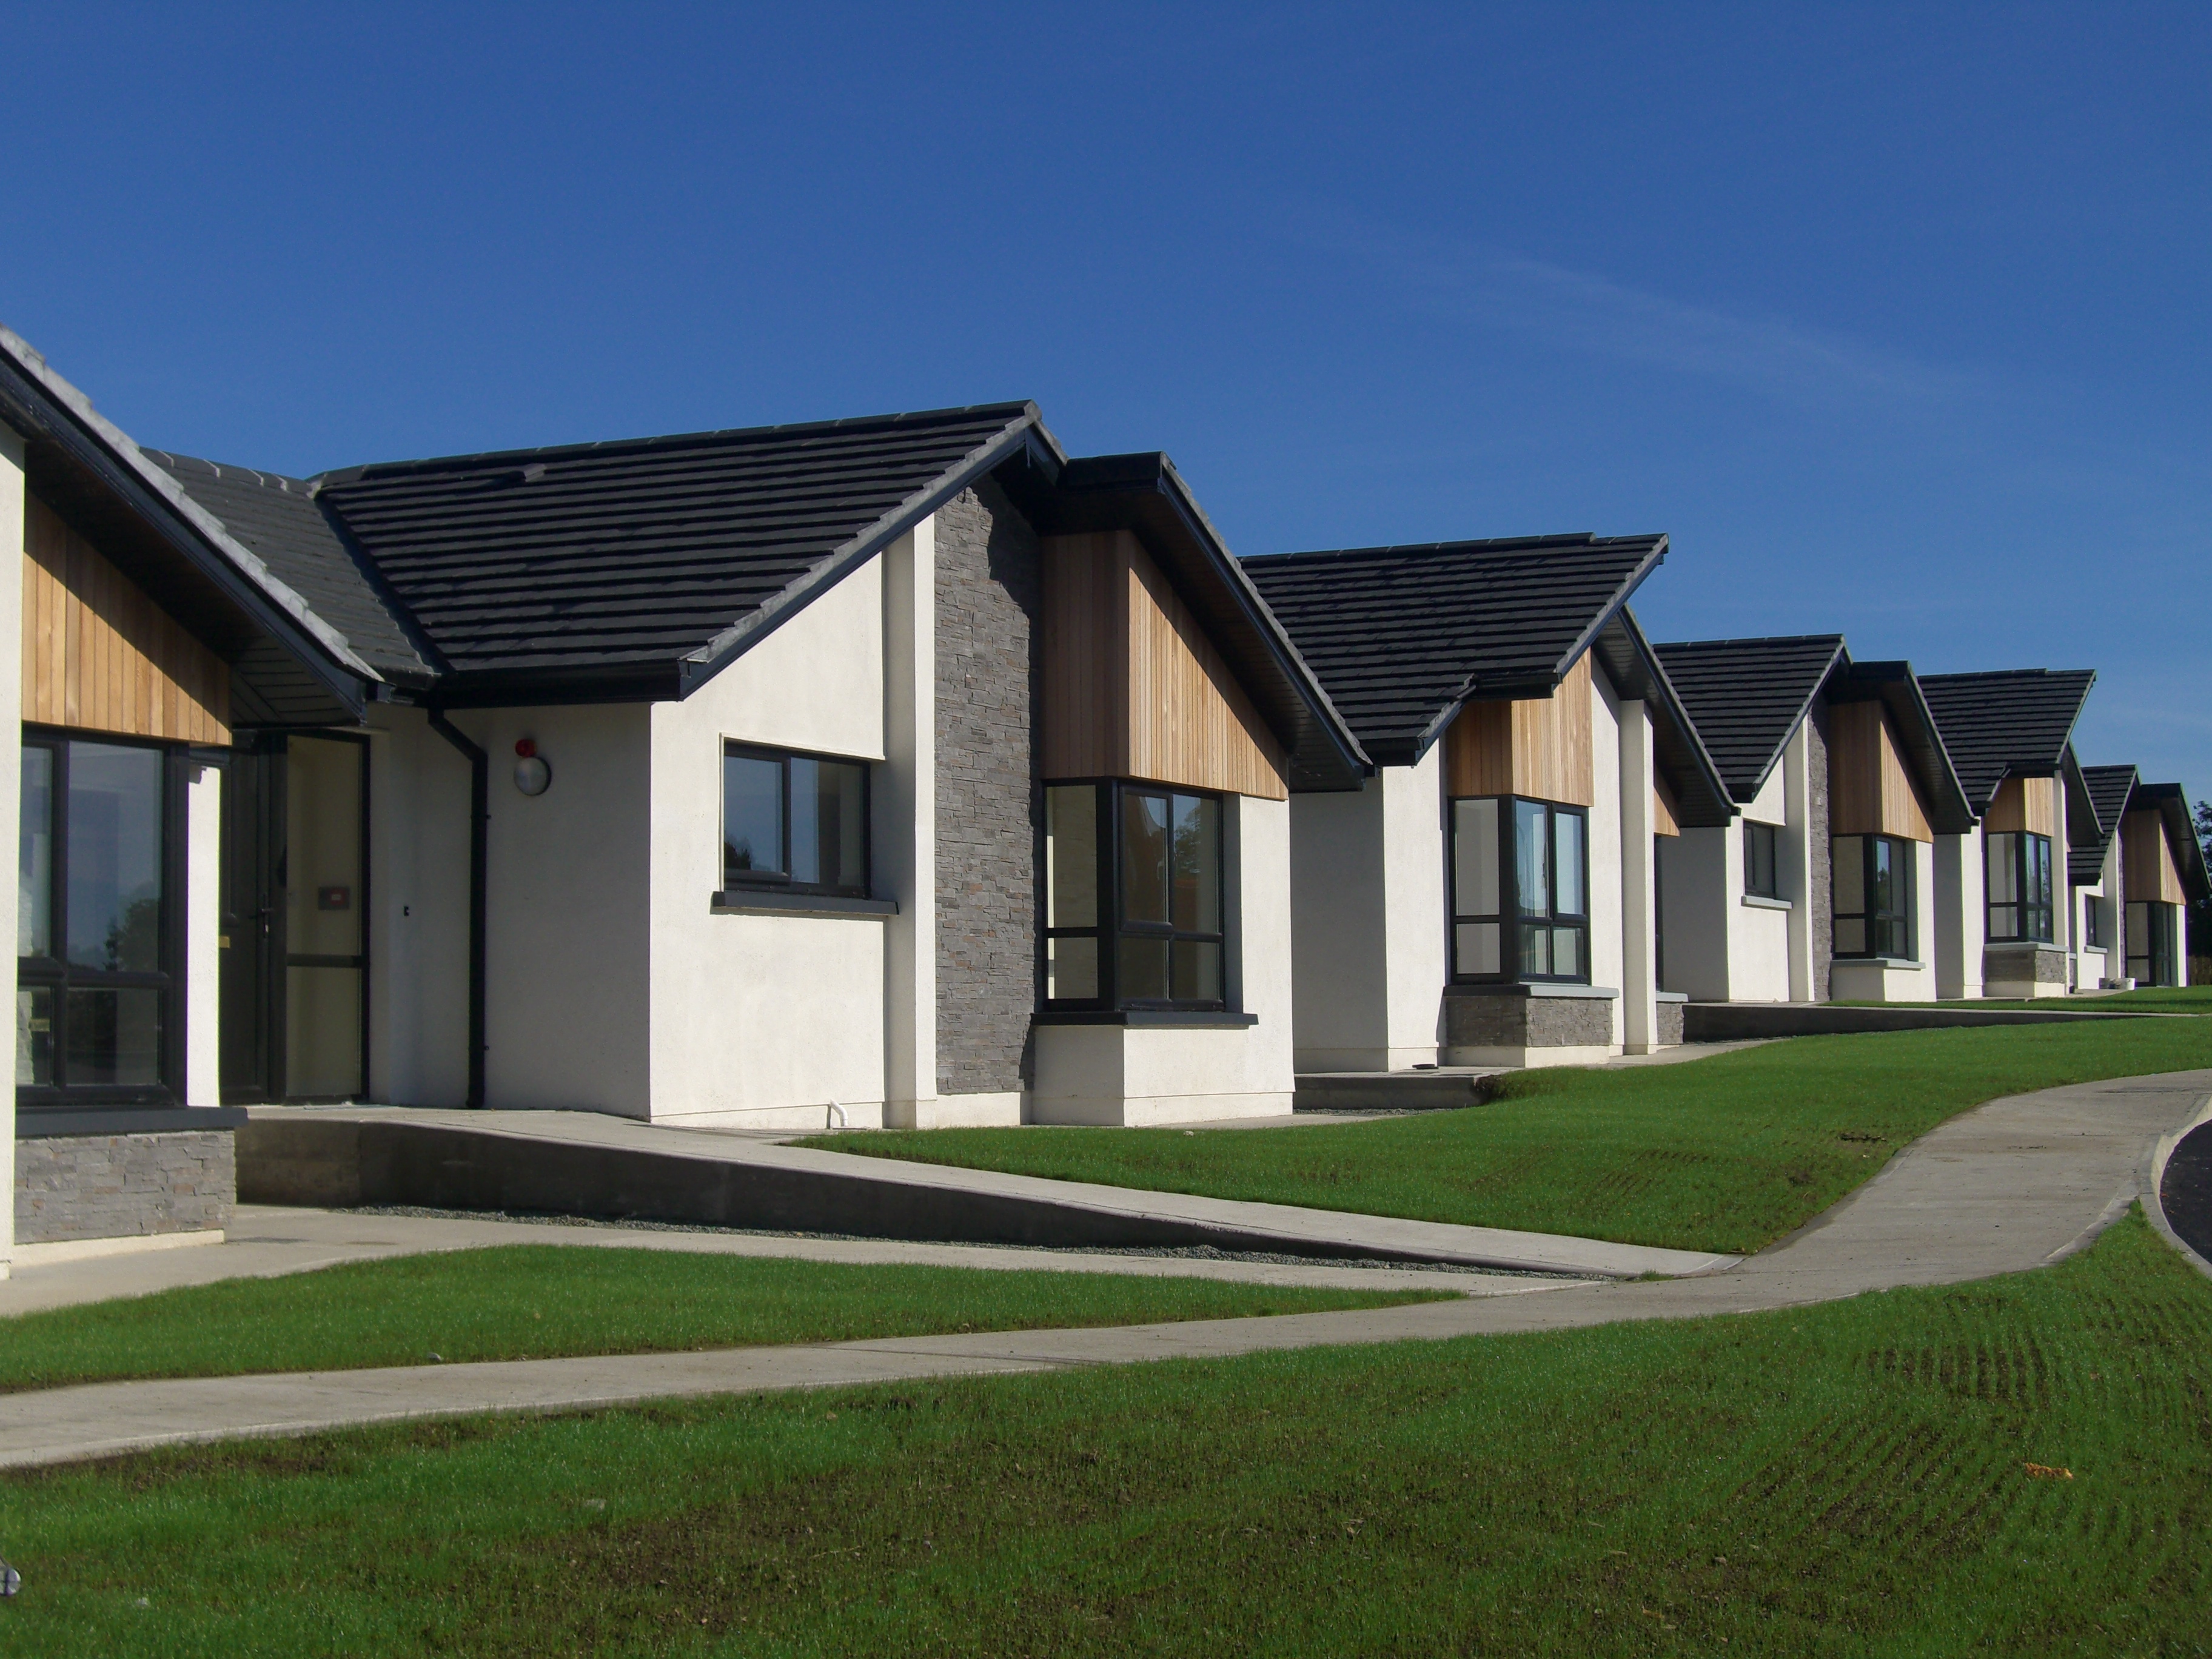 Case Study - Retirement Village - The Timber Frame Company